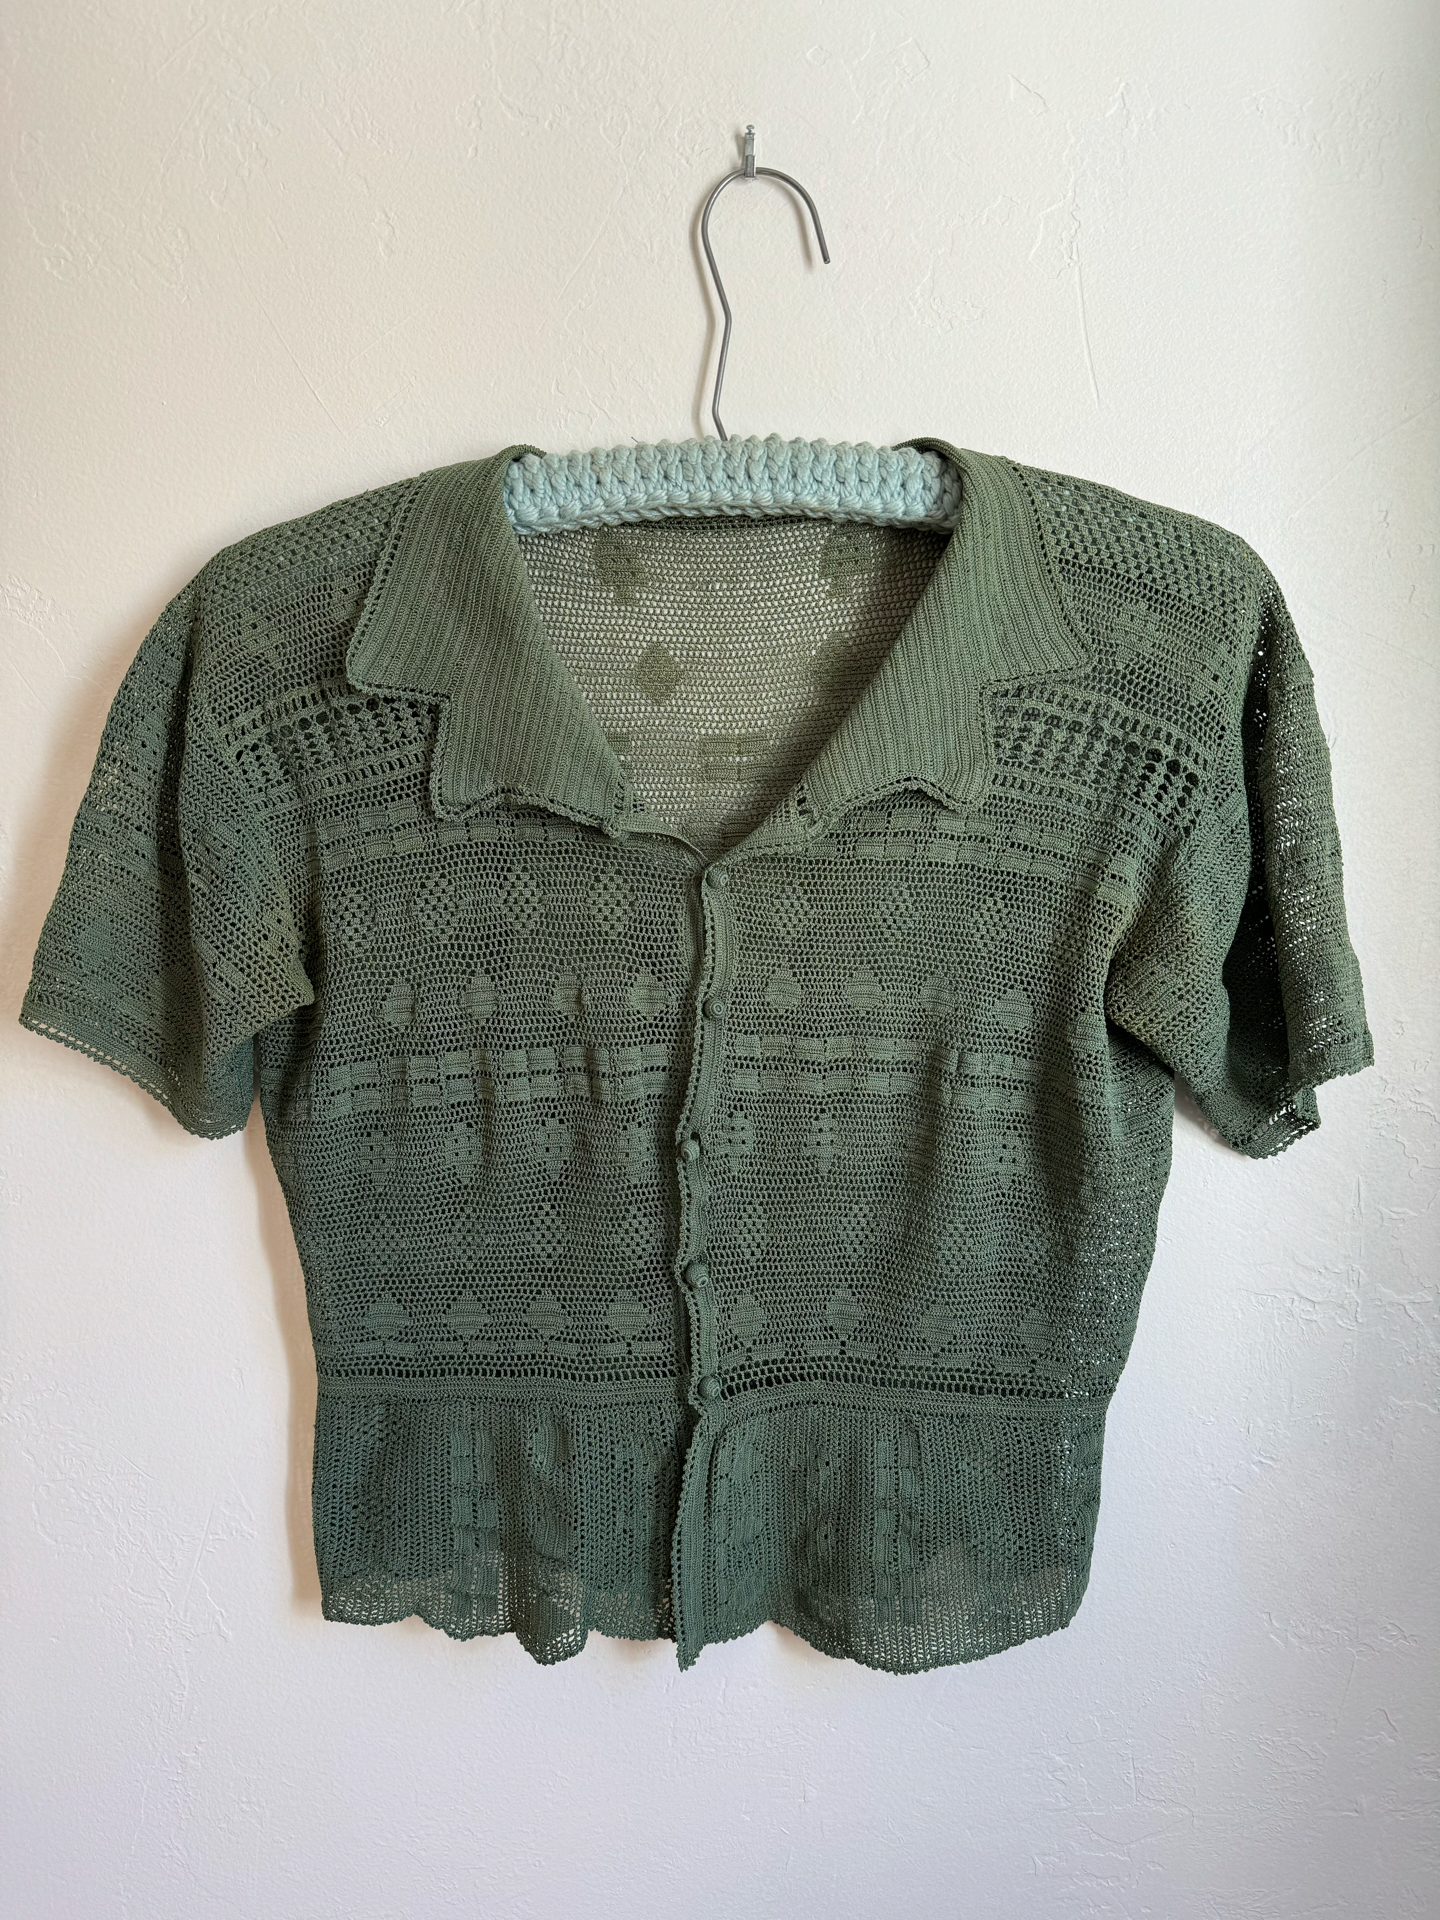 1930s Sage Green Cropped Crocheted Blouse w/ Puffy Buttons- XS/S